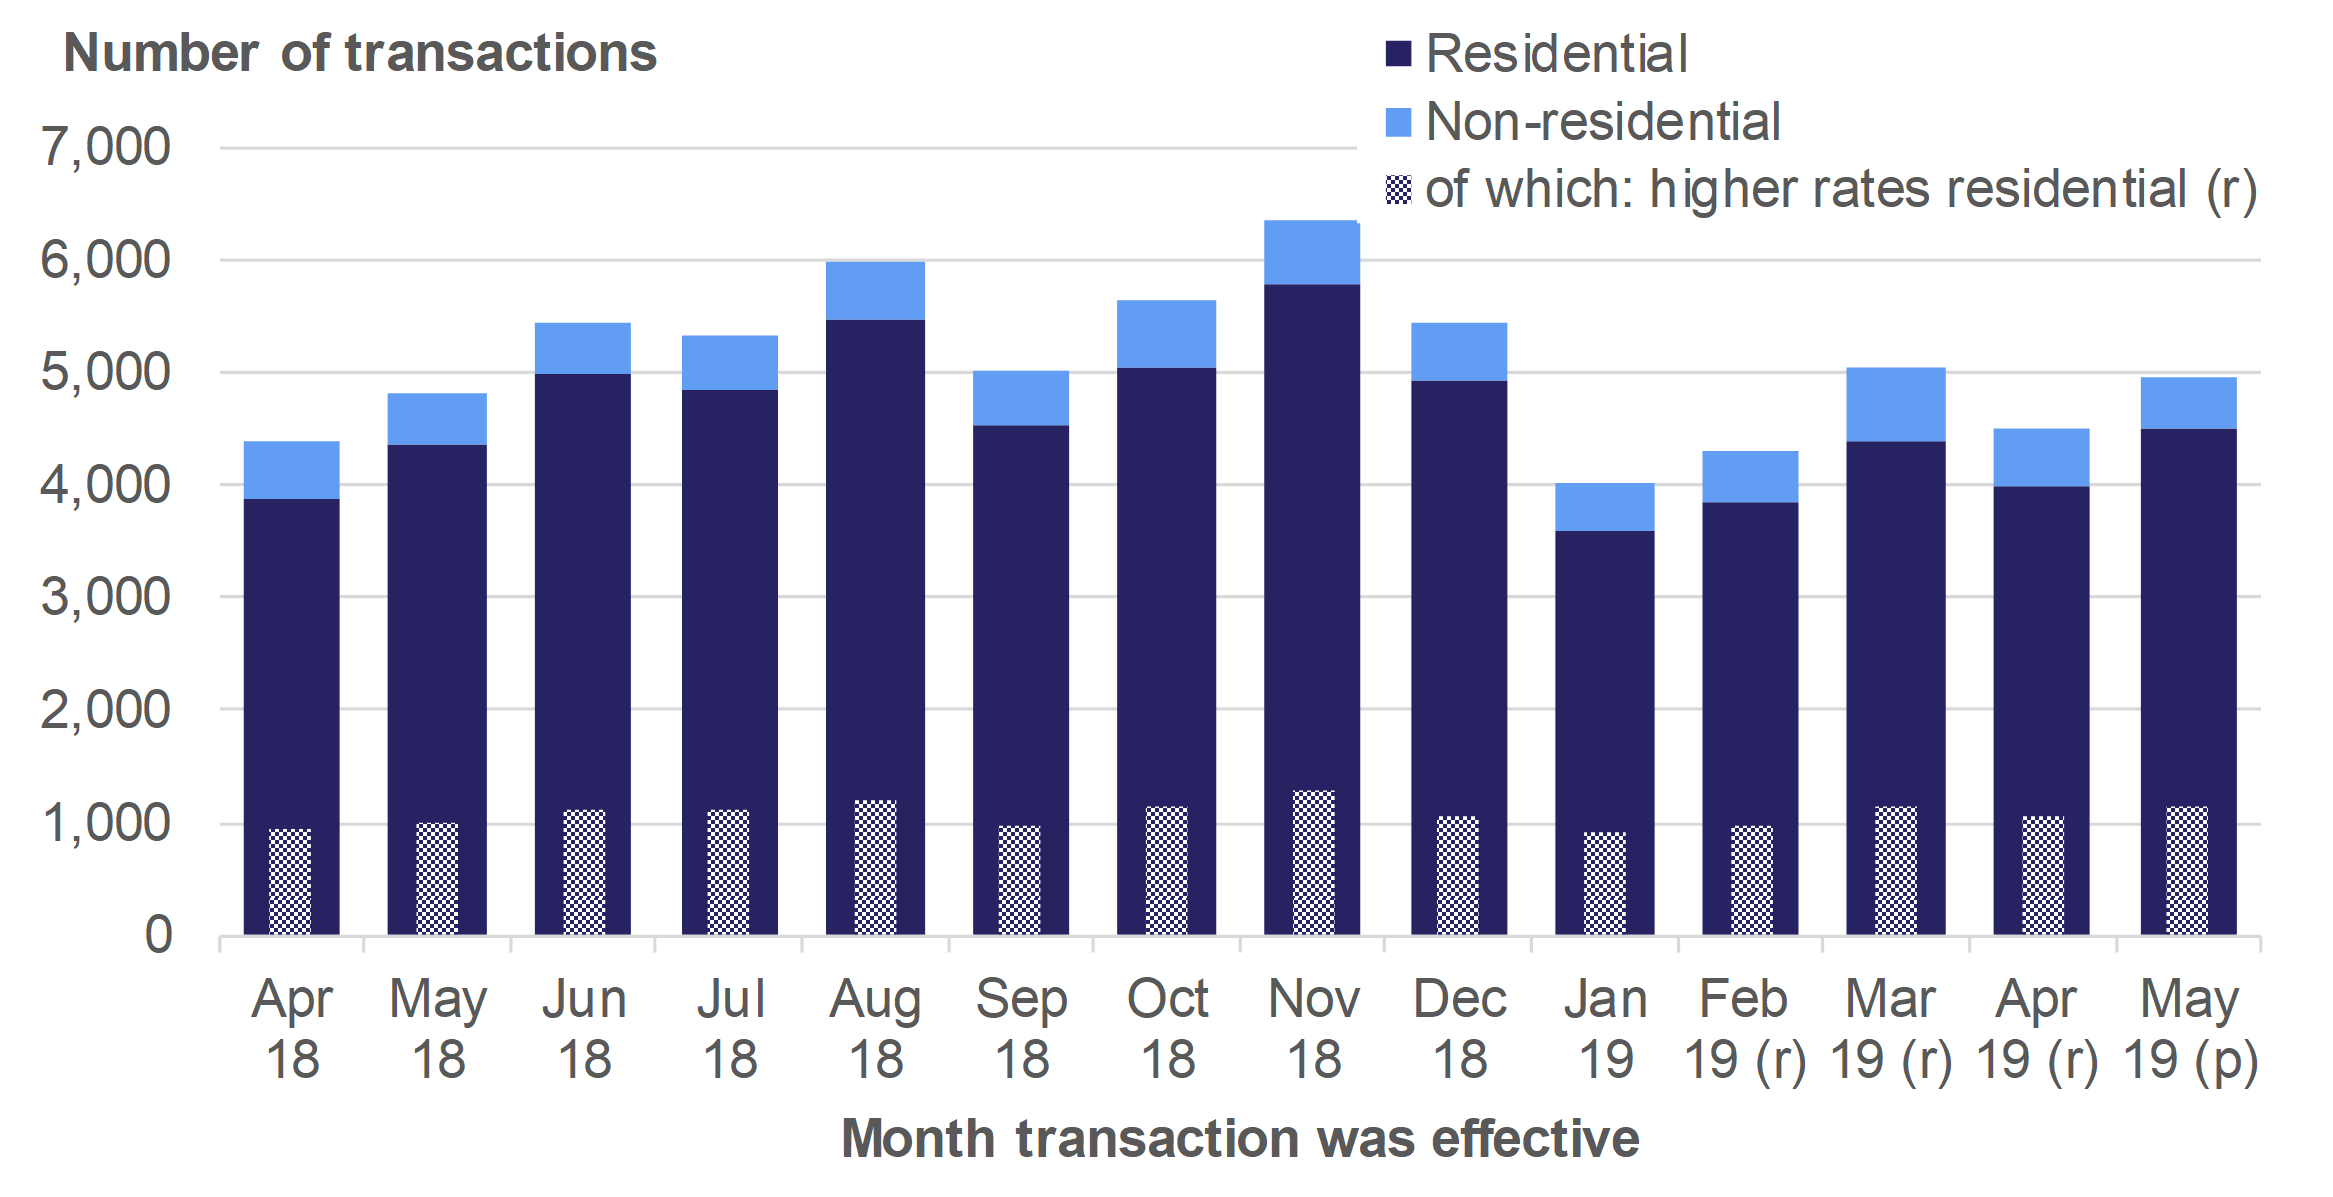 Figure 2.4 shows the monthly numbers of reported notifiable transactions from April 2018 to May 2019, for residential and non-residential transactions